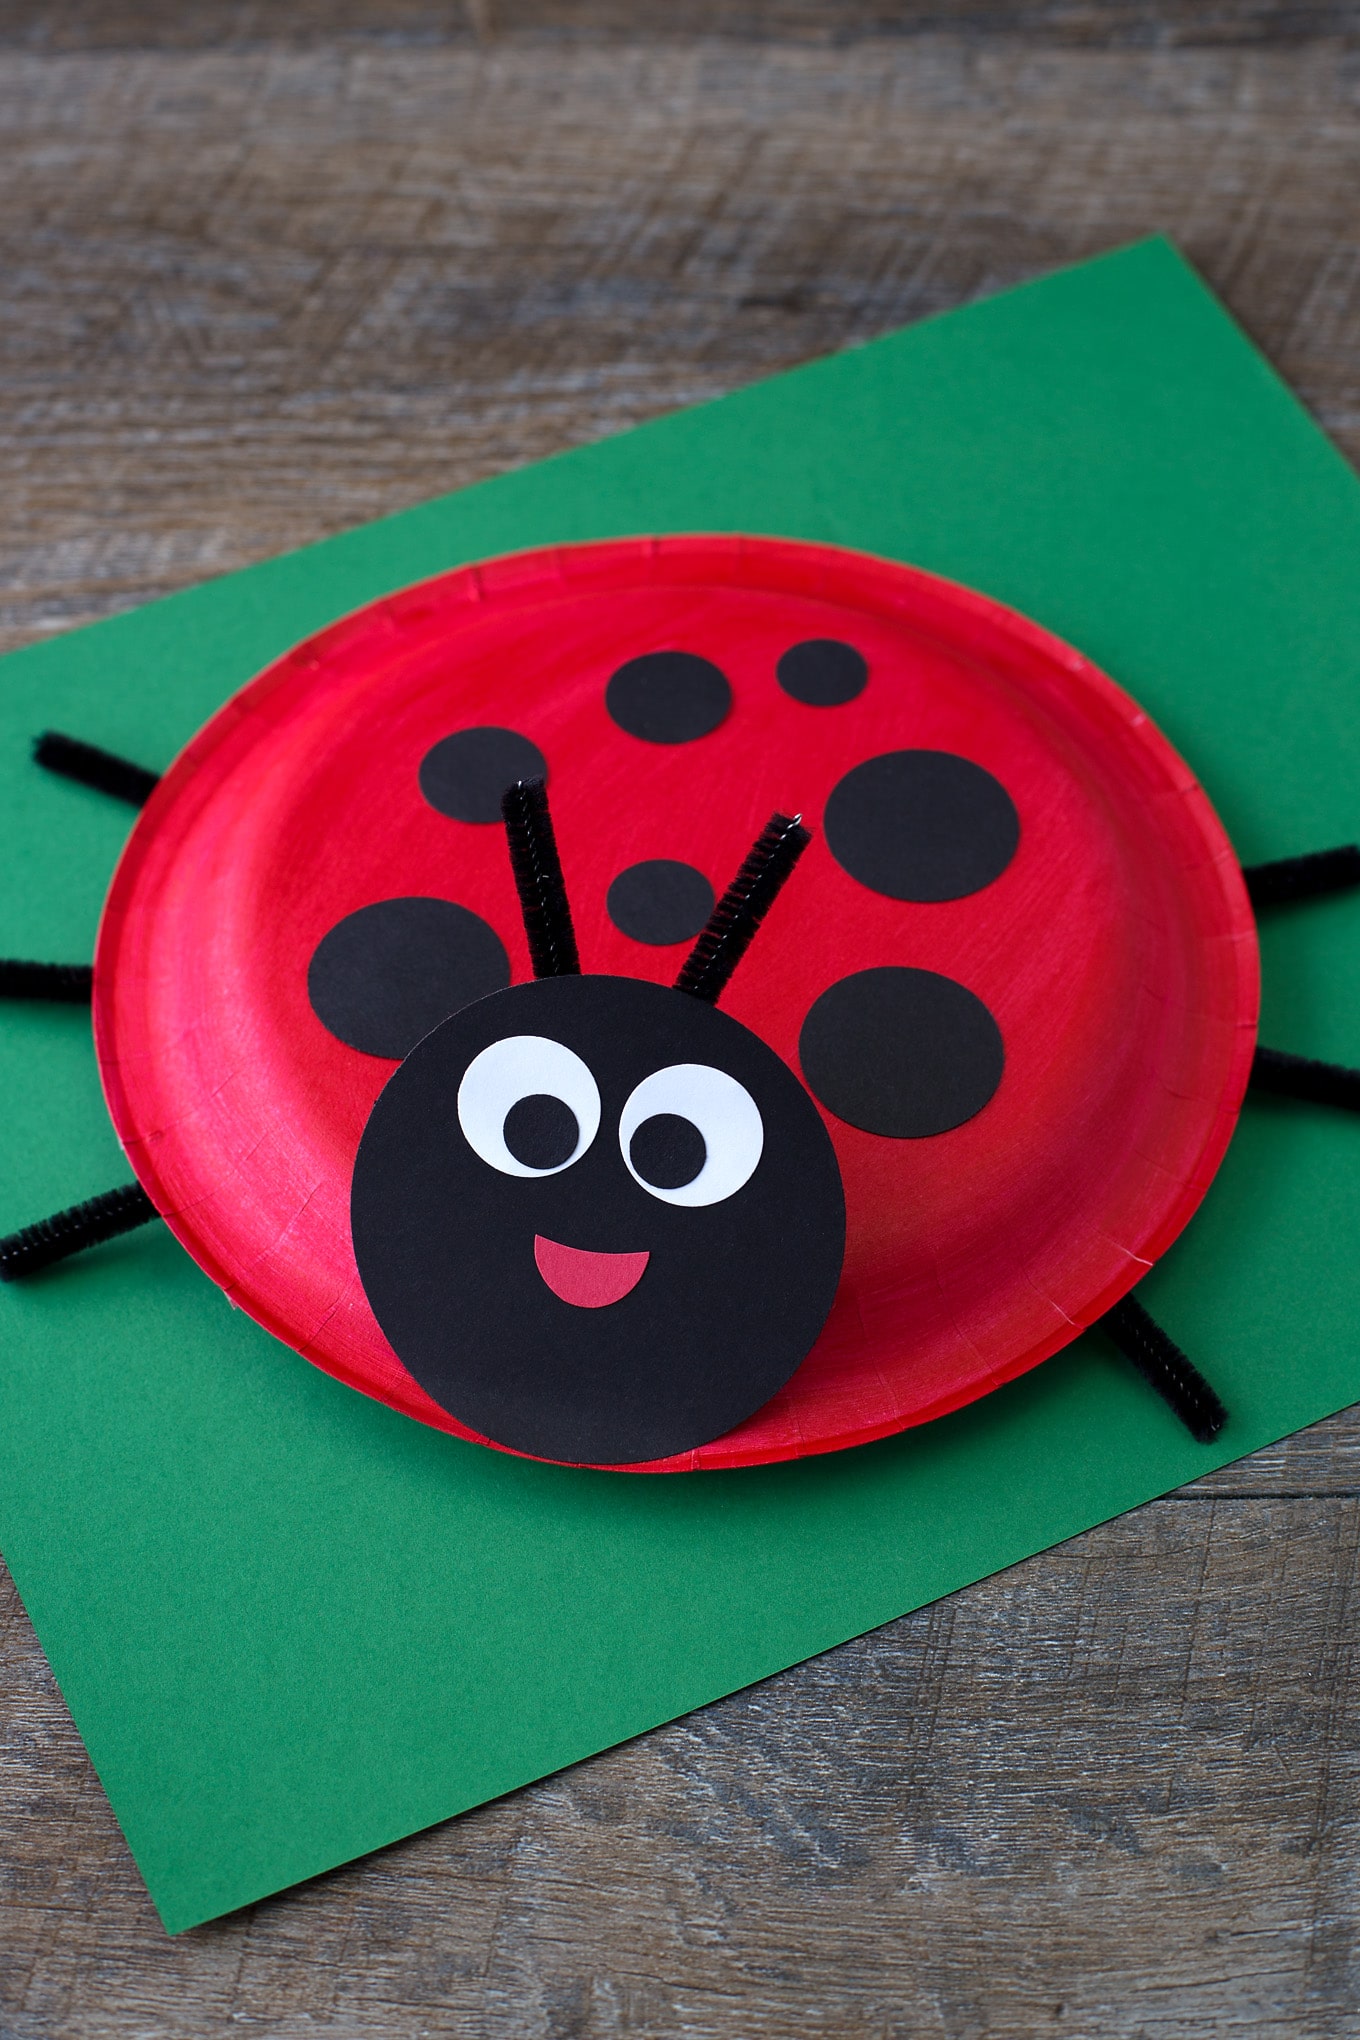 How to Make a Paper Plate Ladybug